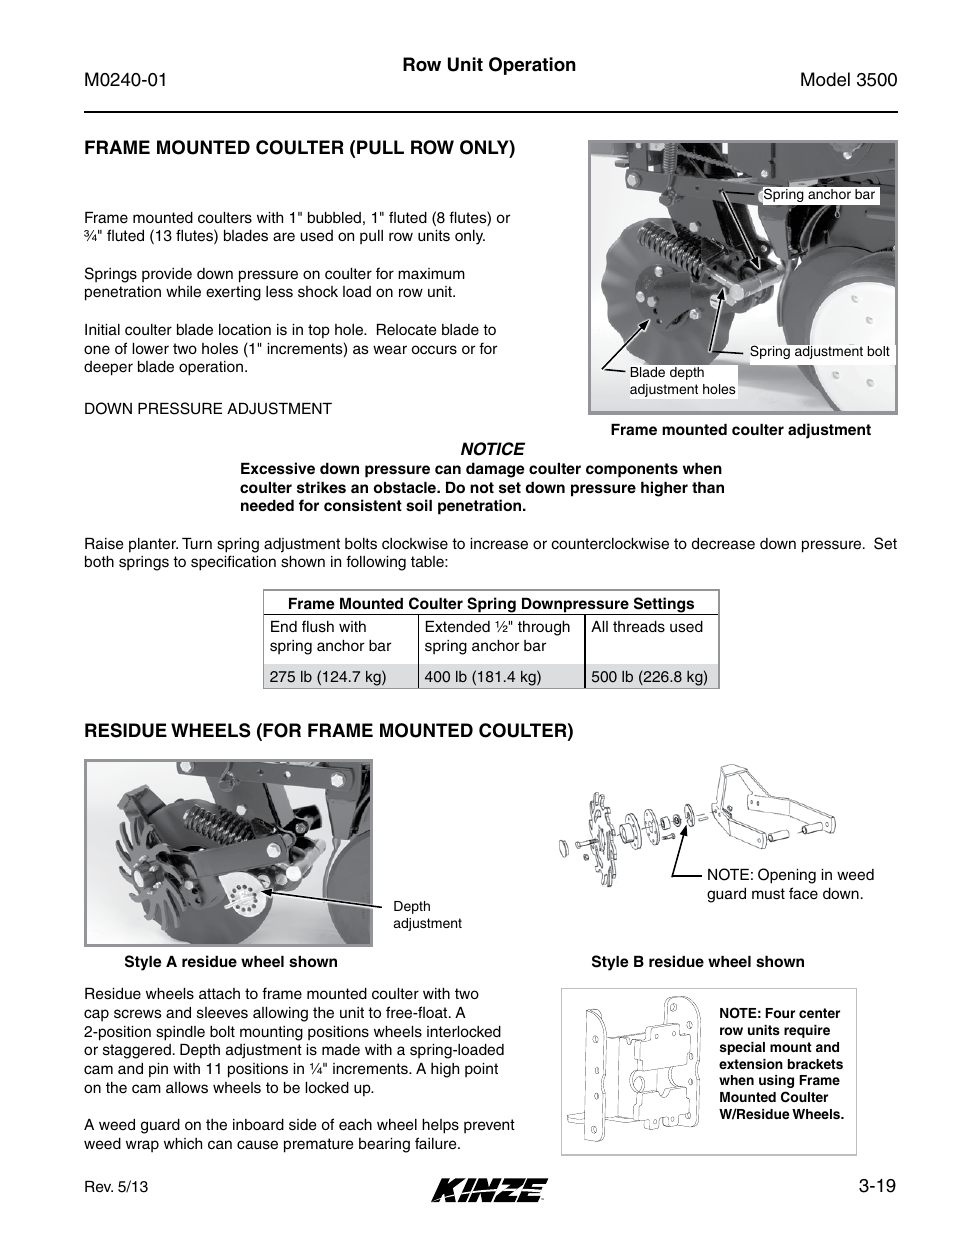 Frame mounted coulter (pull row only), Residue wheels (for frame mounted coulter), Frame mounted coulter (pull row only) -19 | Residue wheels (for frame mounted coulter) -19 | Kinze 3500 Lift and Rotate Planter Rev. 7/14 User Manual | Page 53 / 140